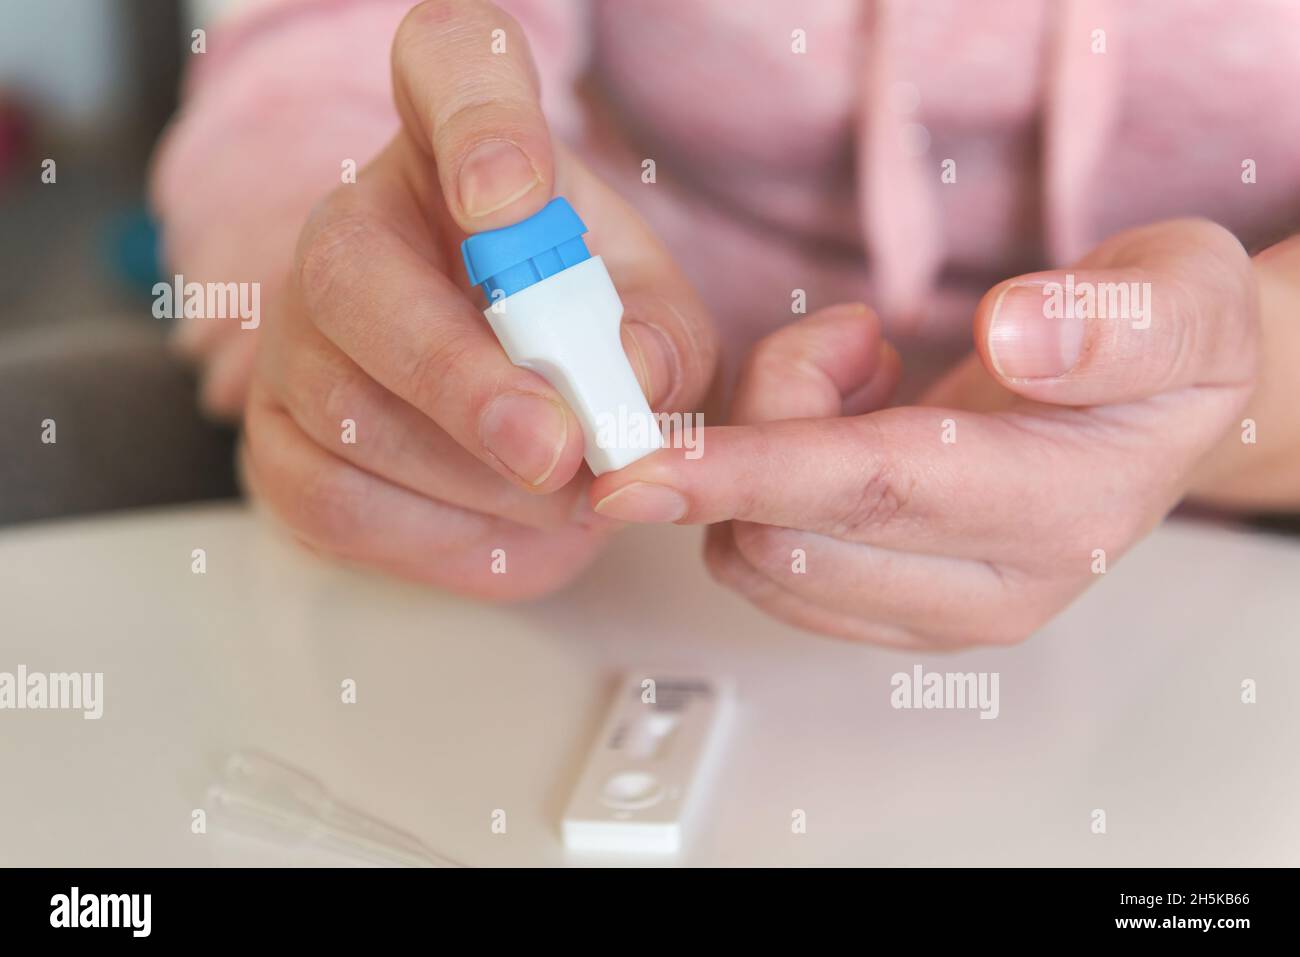 The woman uses a lancing device to take a blood sample from her finger and test for COVID19 or diabetes Stock Photo